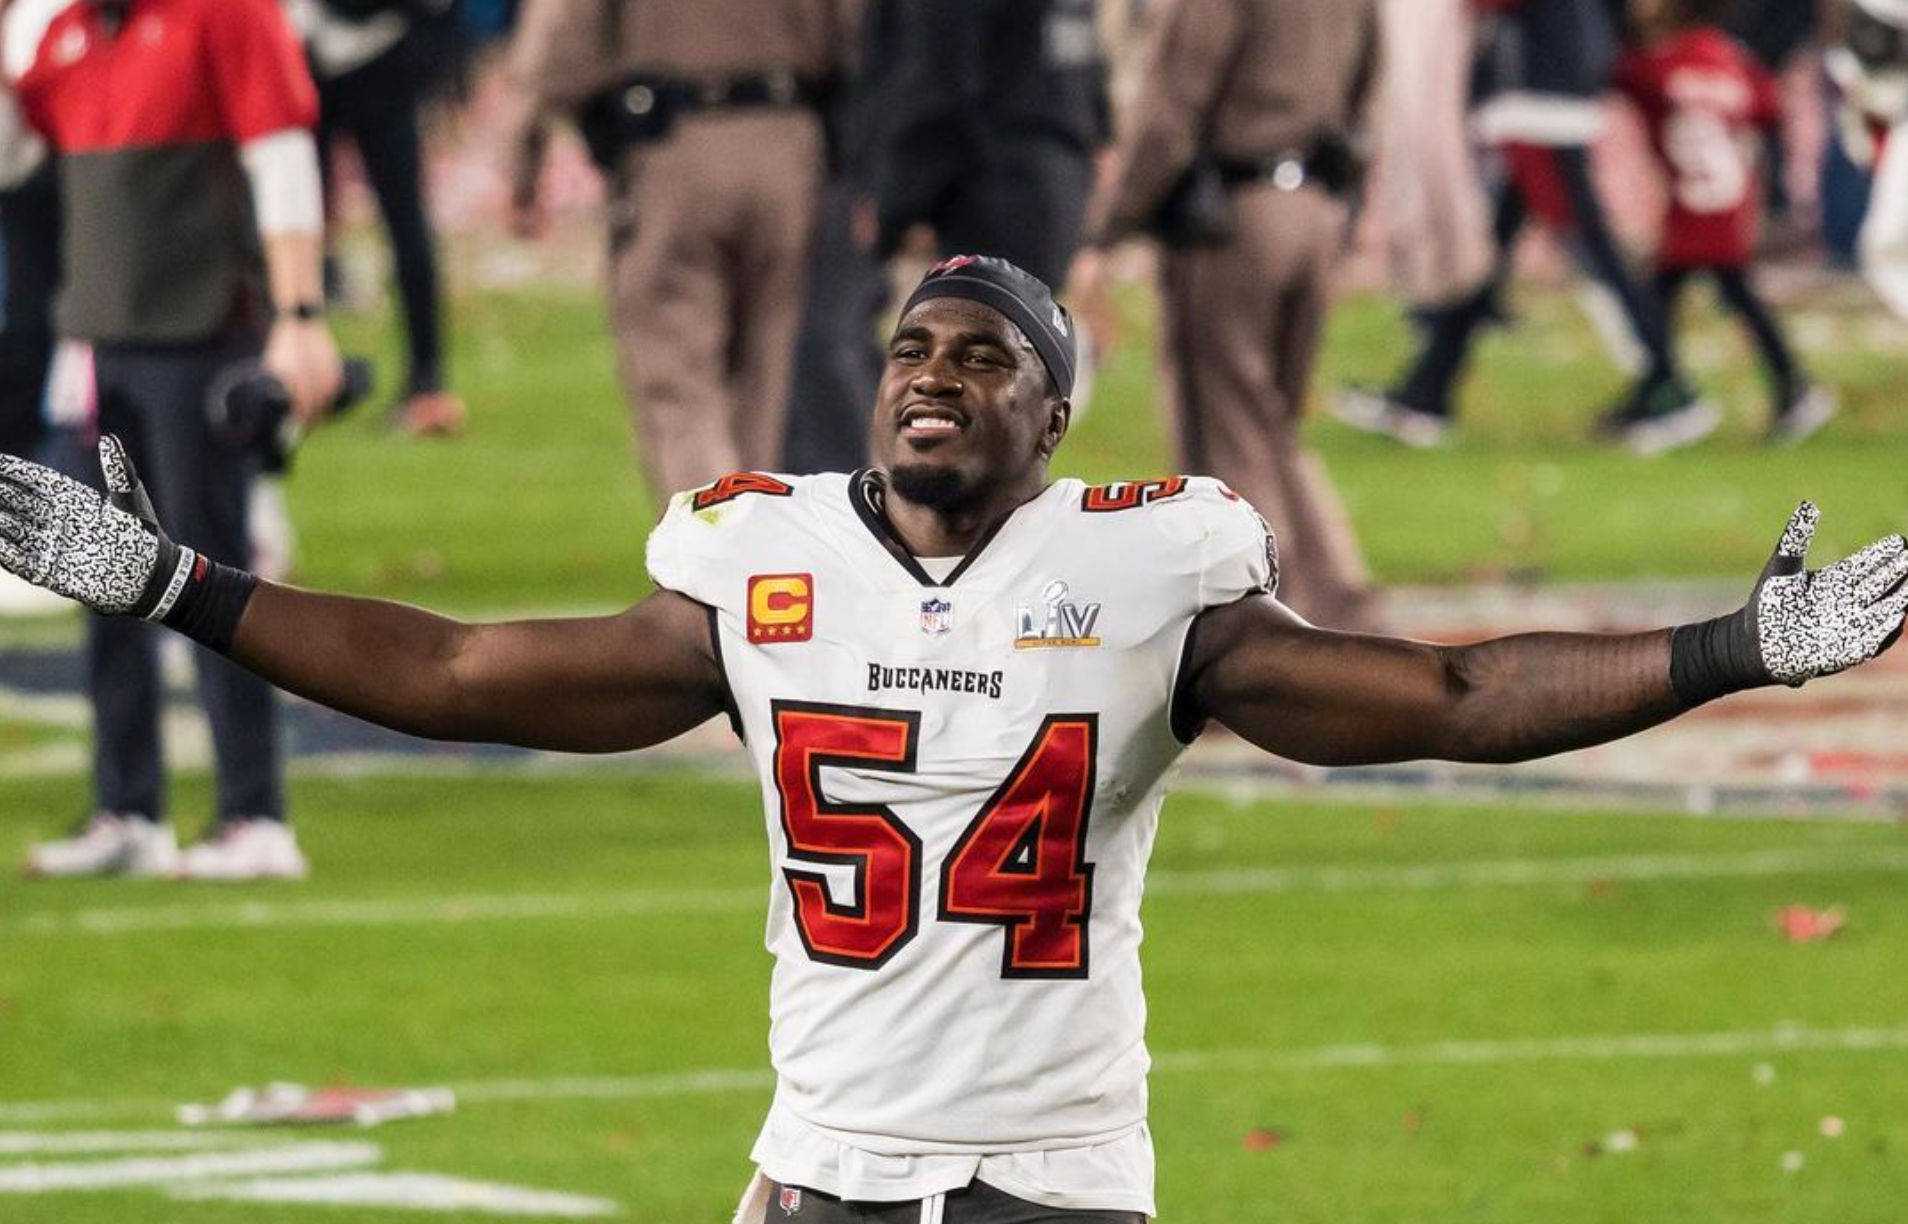 Who is Lavonte David?